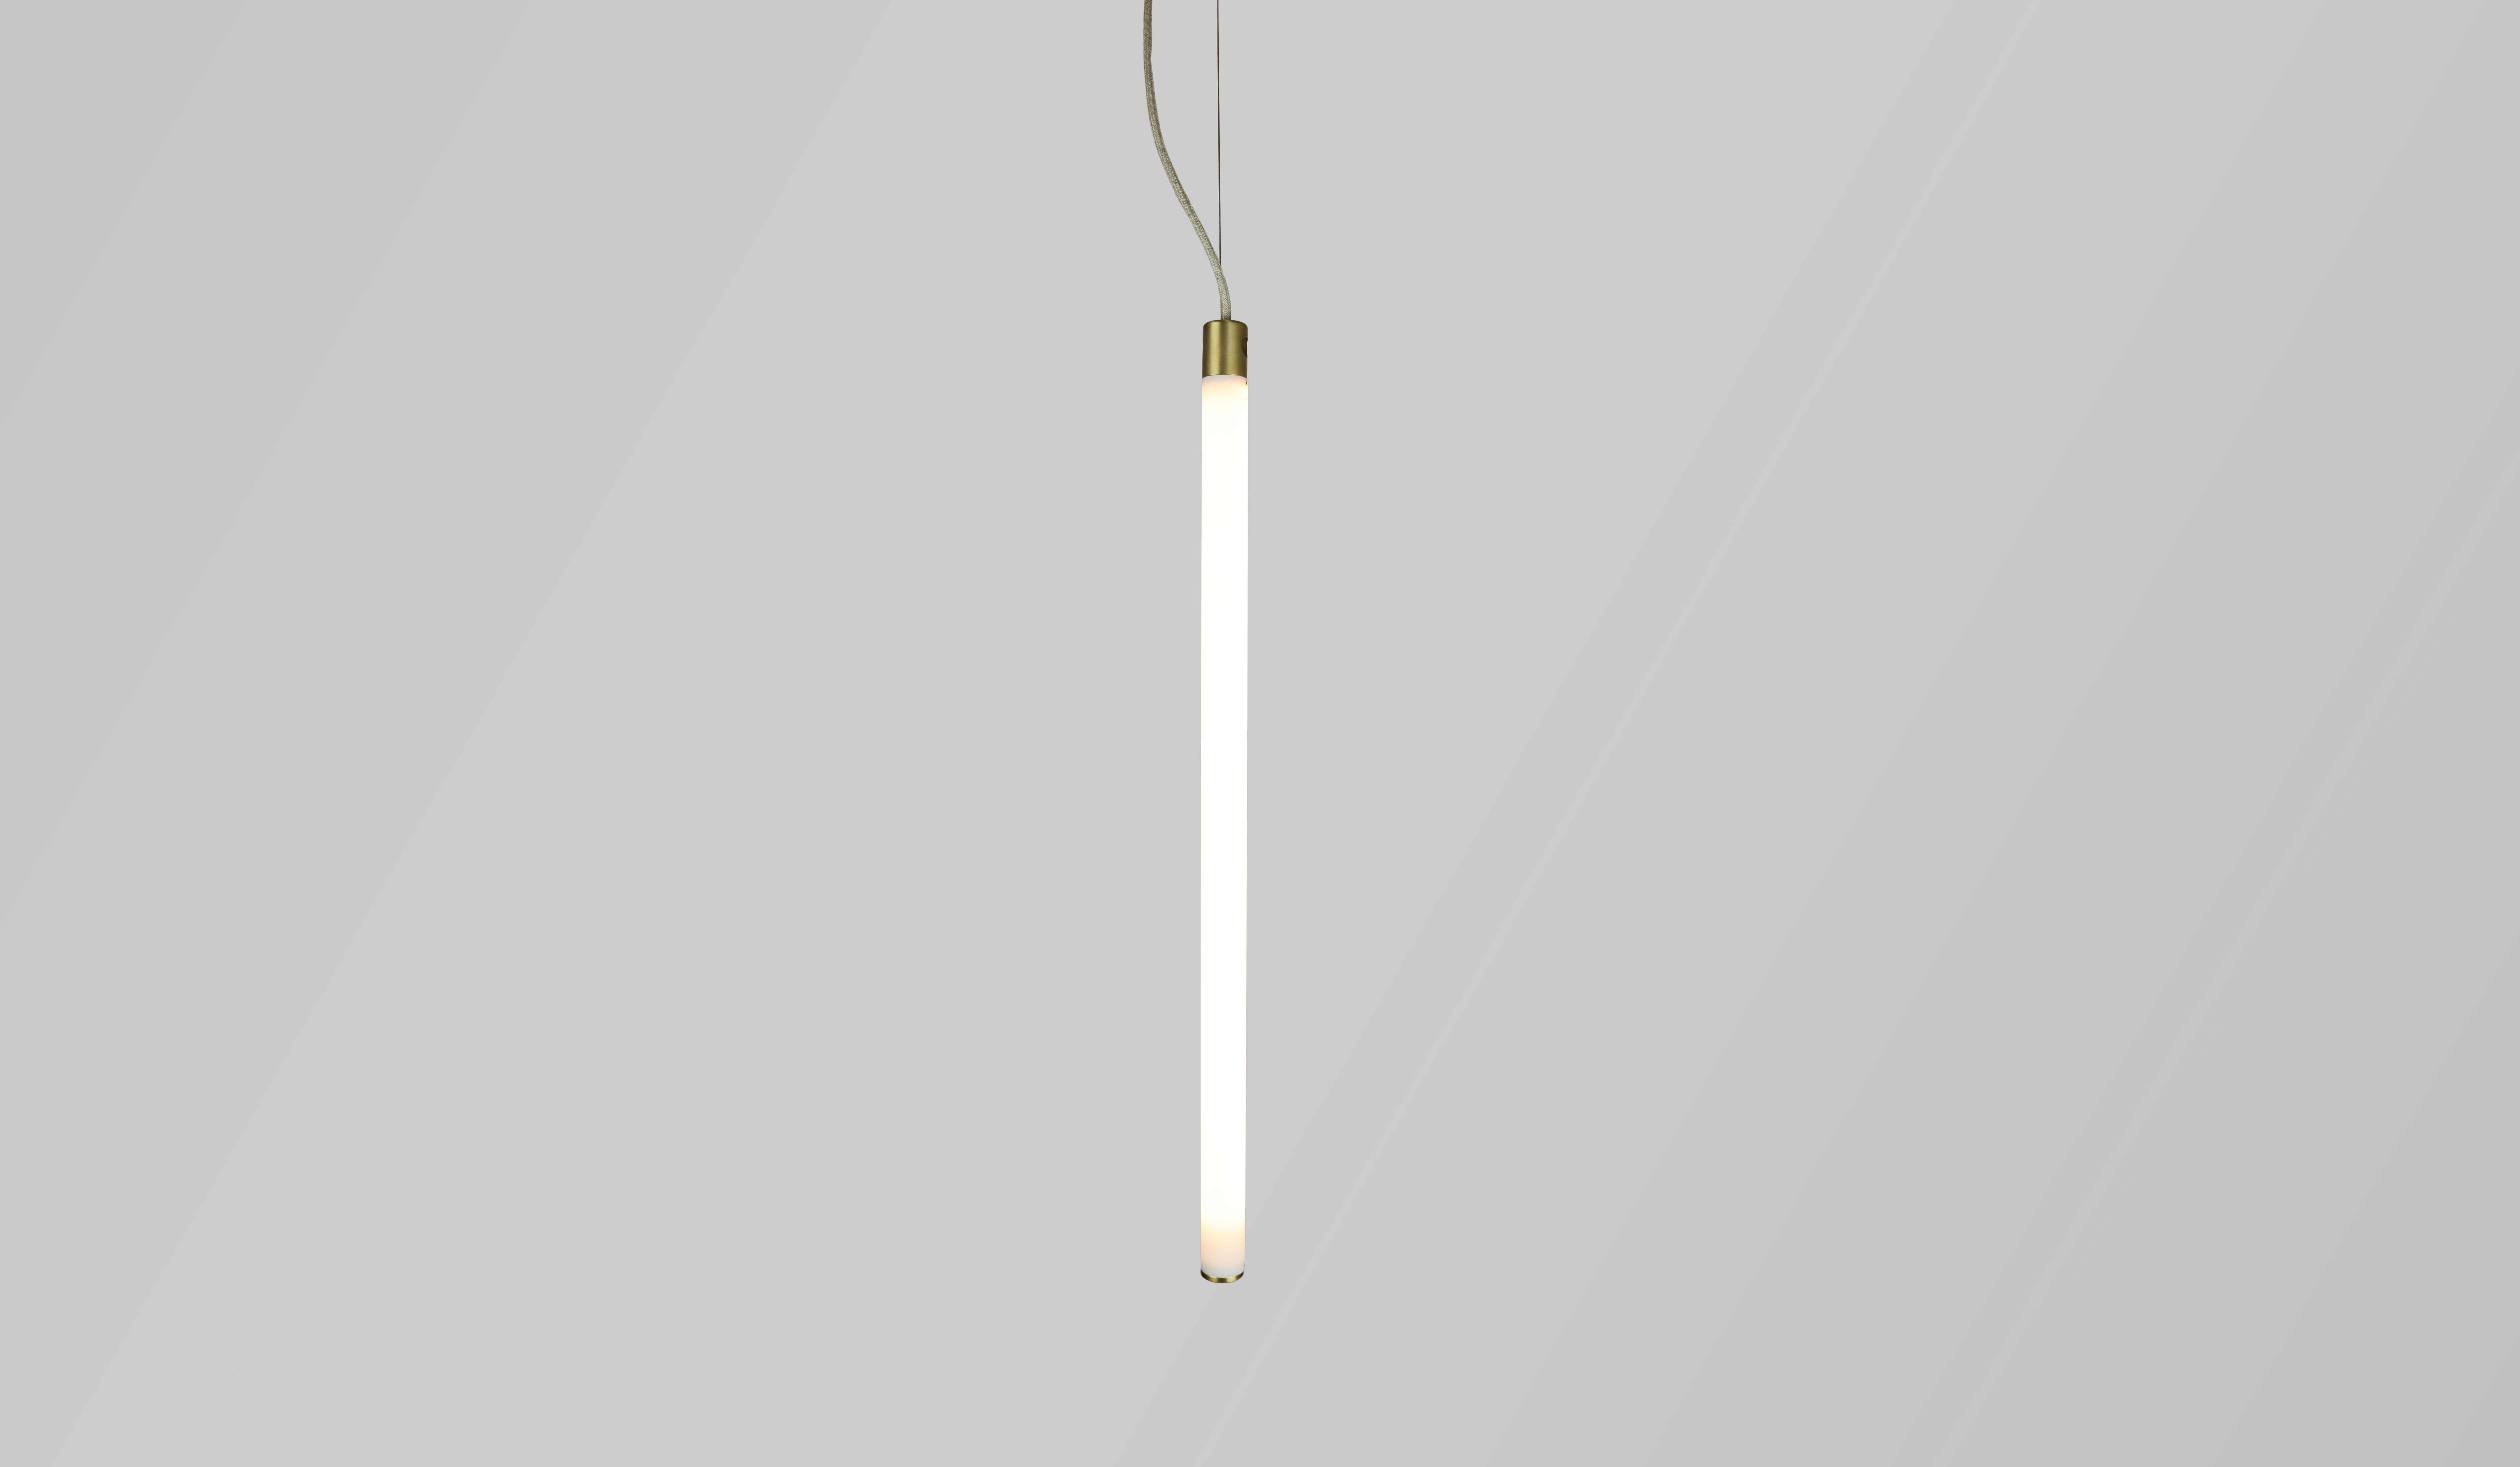 Pendant light object.

Long and slim, this light object contains light in a pure form.

Lead time: 8 weeks
Dimensions: 90 cm (height to order)
Materials: brass, acrylic tube, LED lights
Light: flexible LED strip light, 16W, 24V